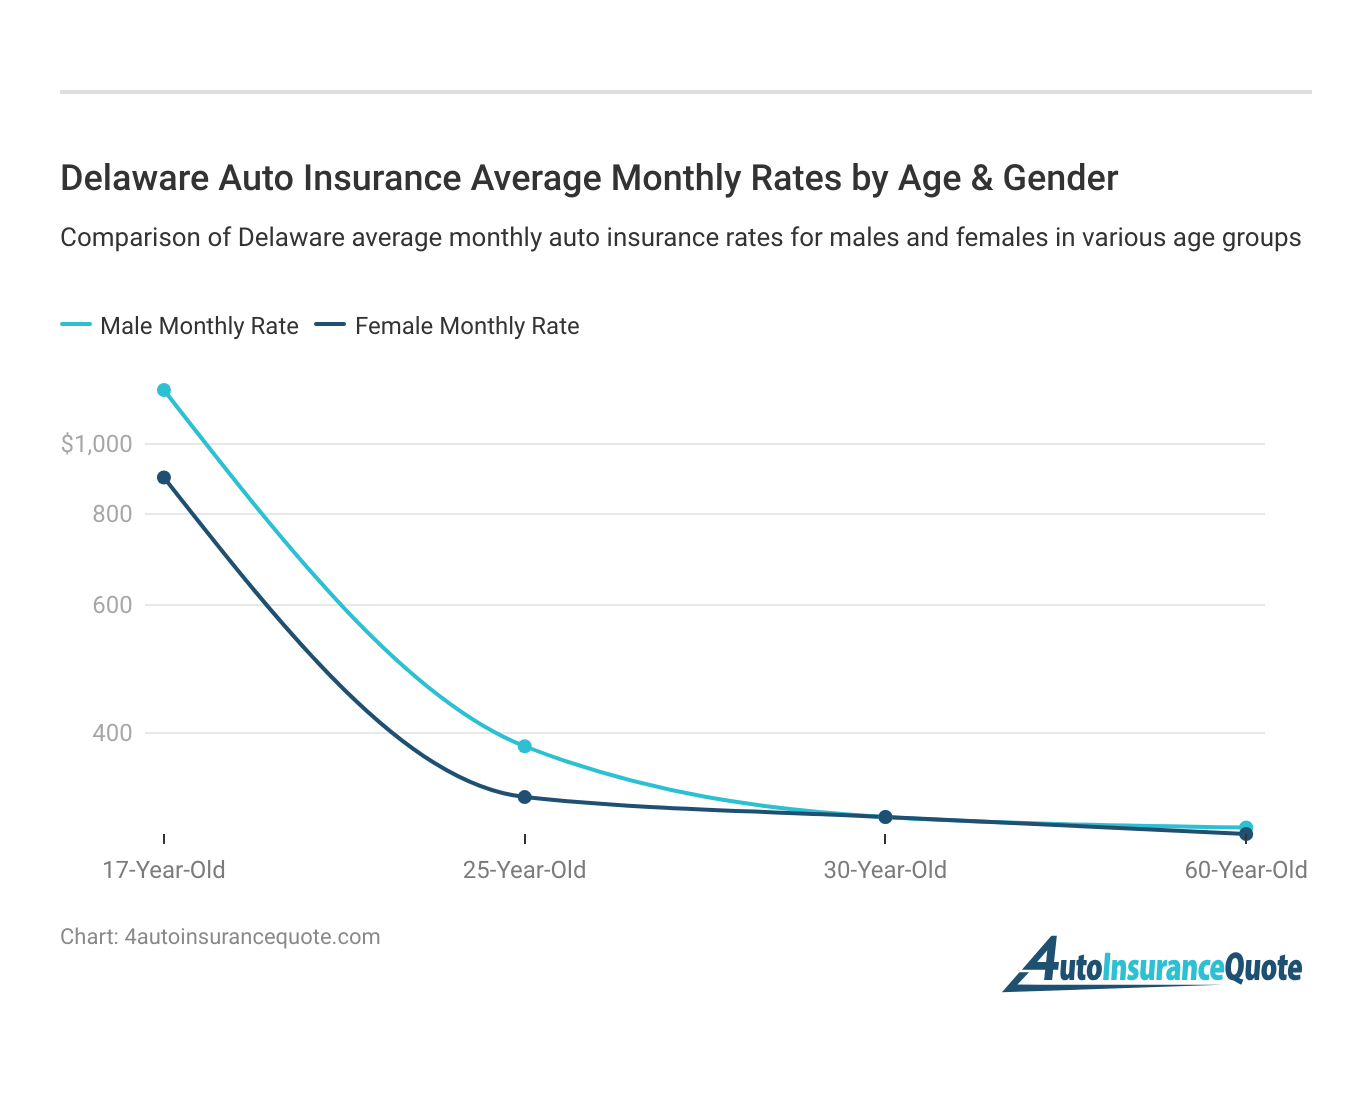 <h3>Delaware Auto Insurance Average Monthly Rates by Age & Gender</h3>